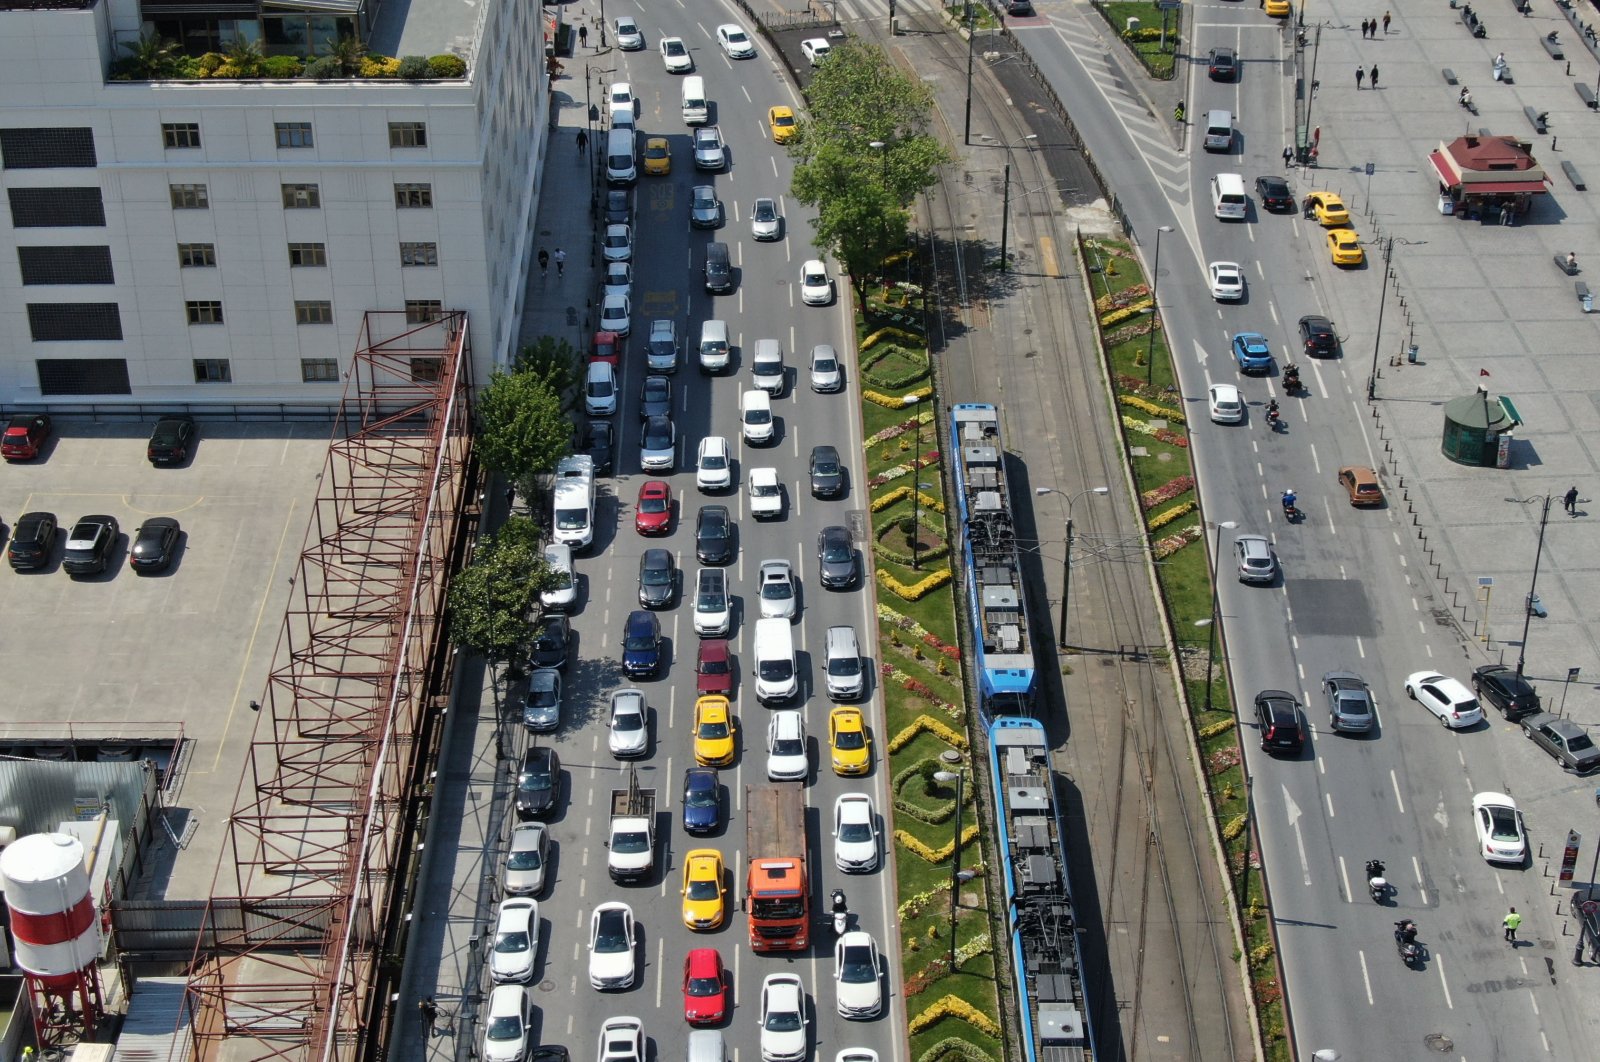 This photo of a traffic jam captured in the historic Eminönü district prompted Health Minister Fahrettin Koca to issue fresh warnings about the virus threat, Istanbul, Turkey, May 7, 2020. (DHA Photo)